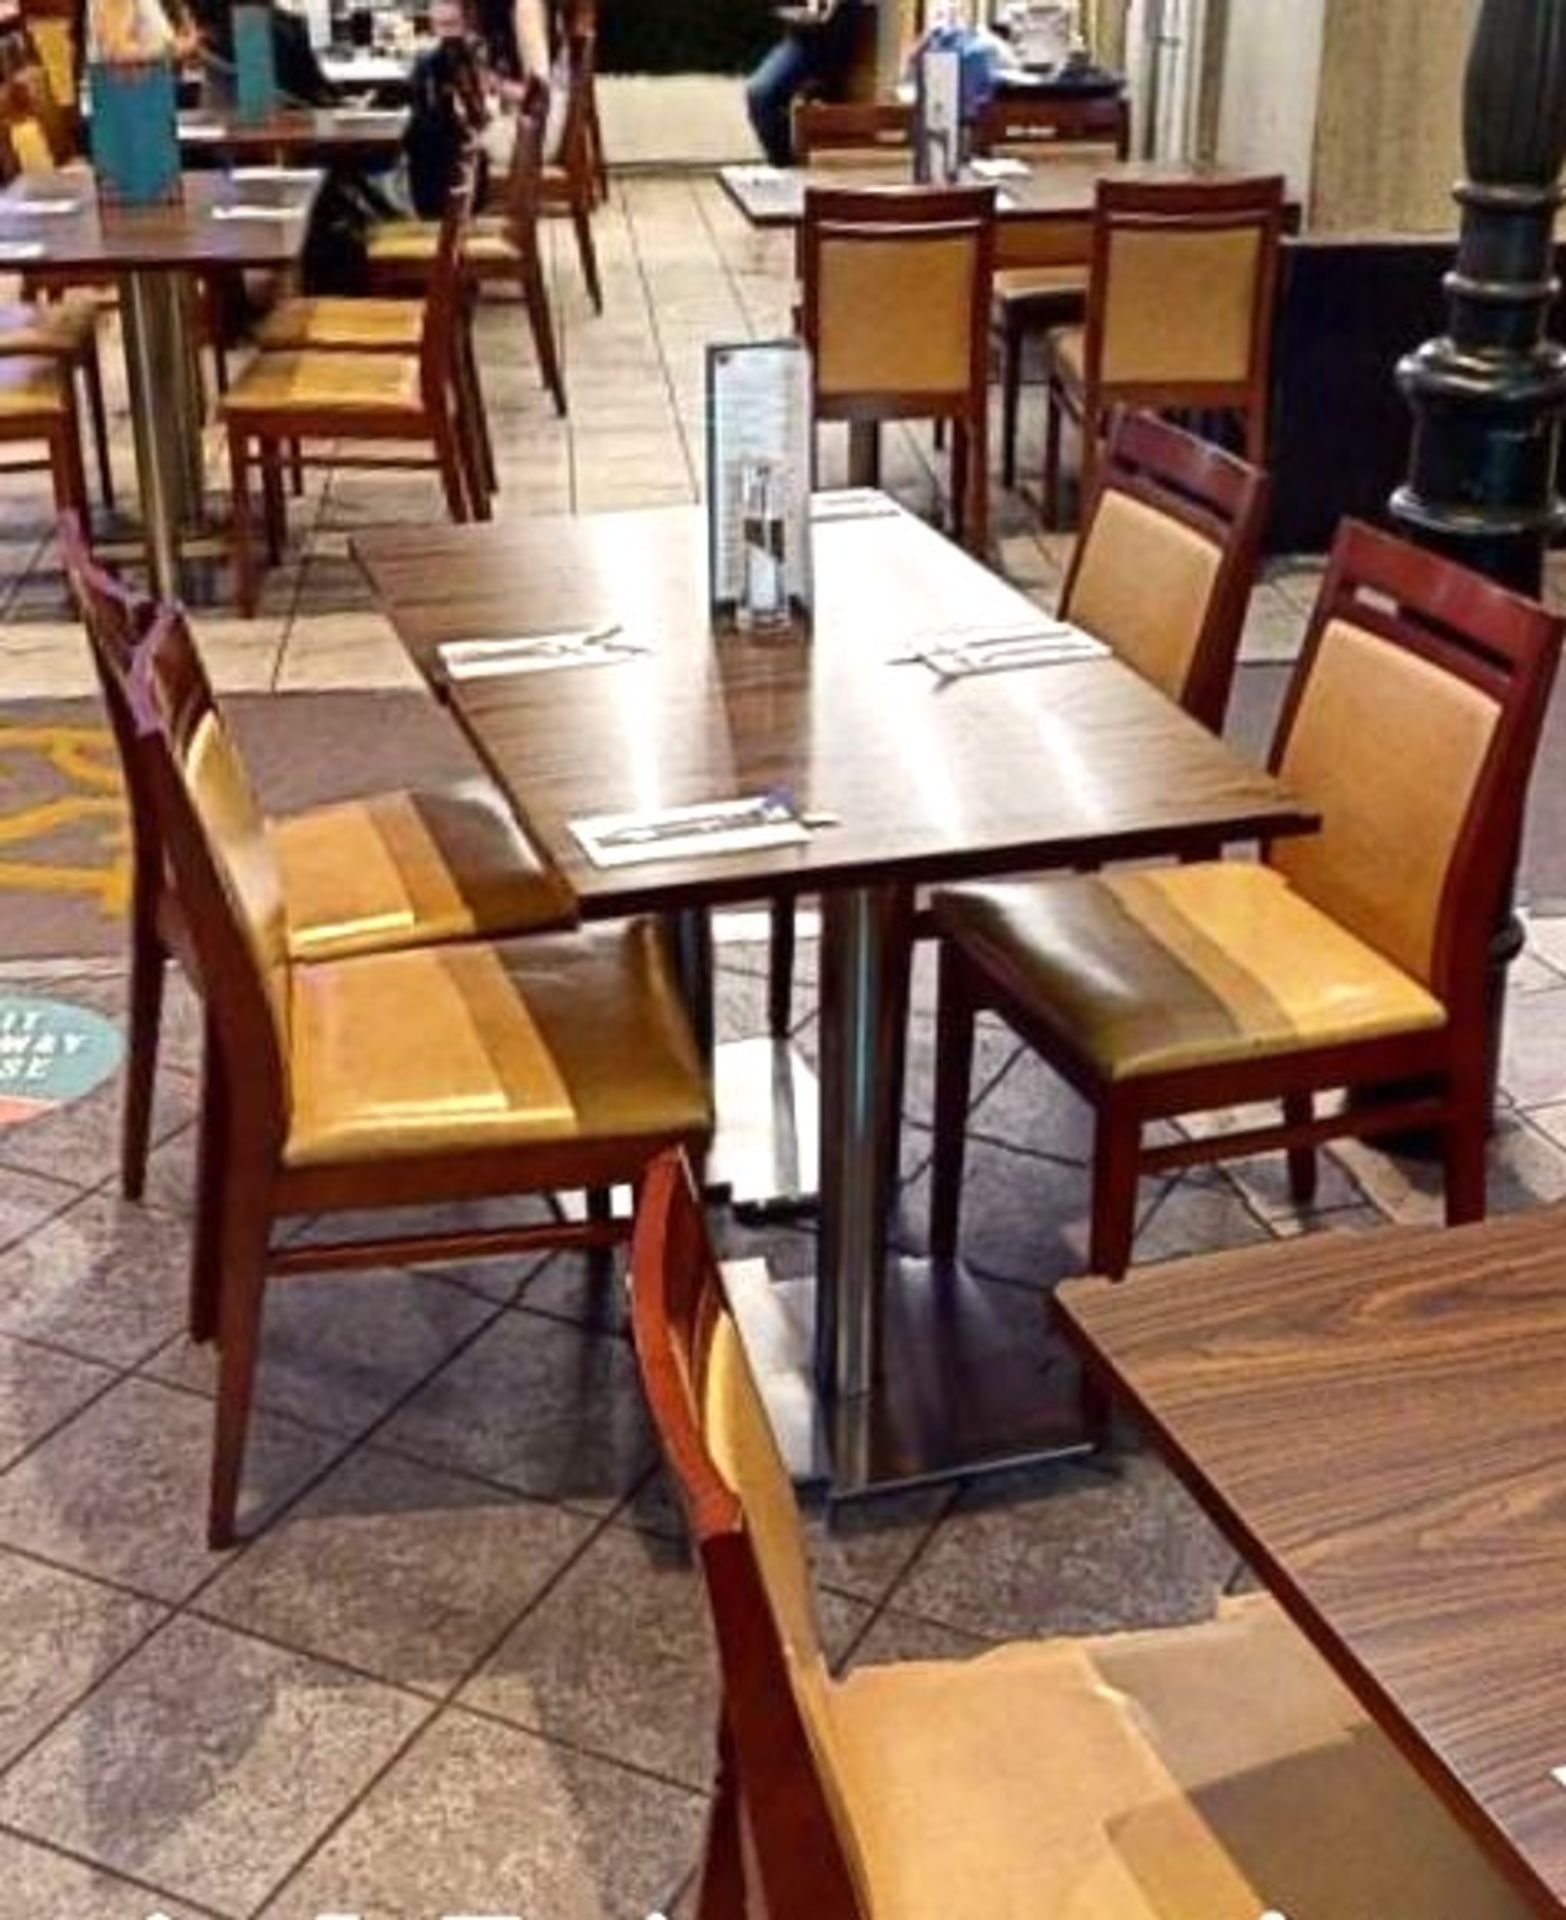 4 x Two Person Restaurant Dining Tables Featuring Chrome Pedestals and Tops With a Walnut Finish - - Image 3 of 4